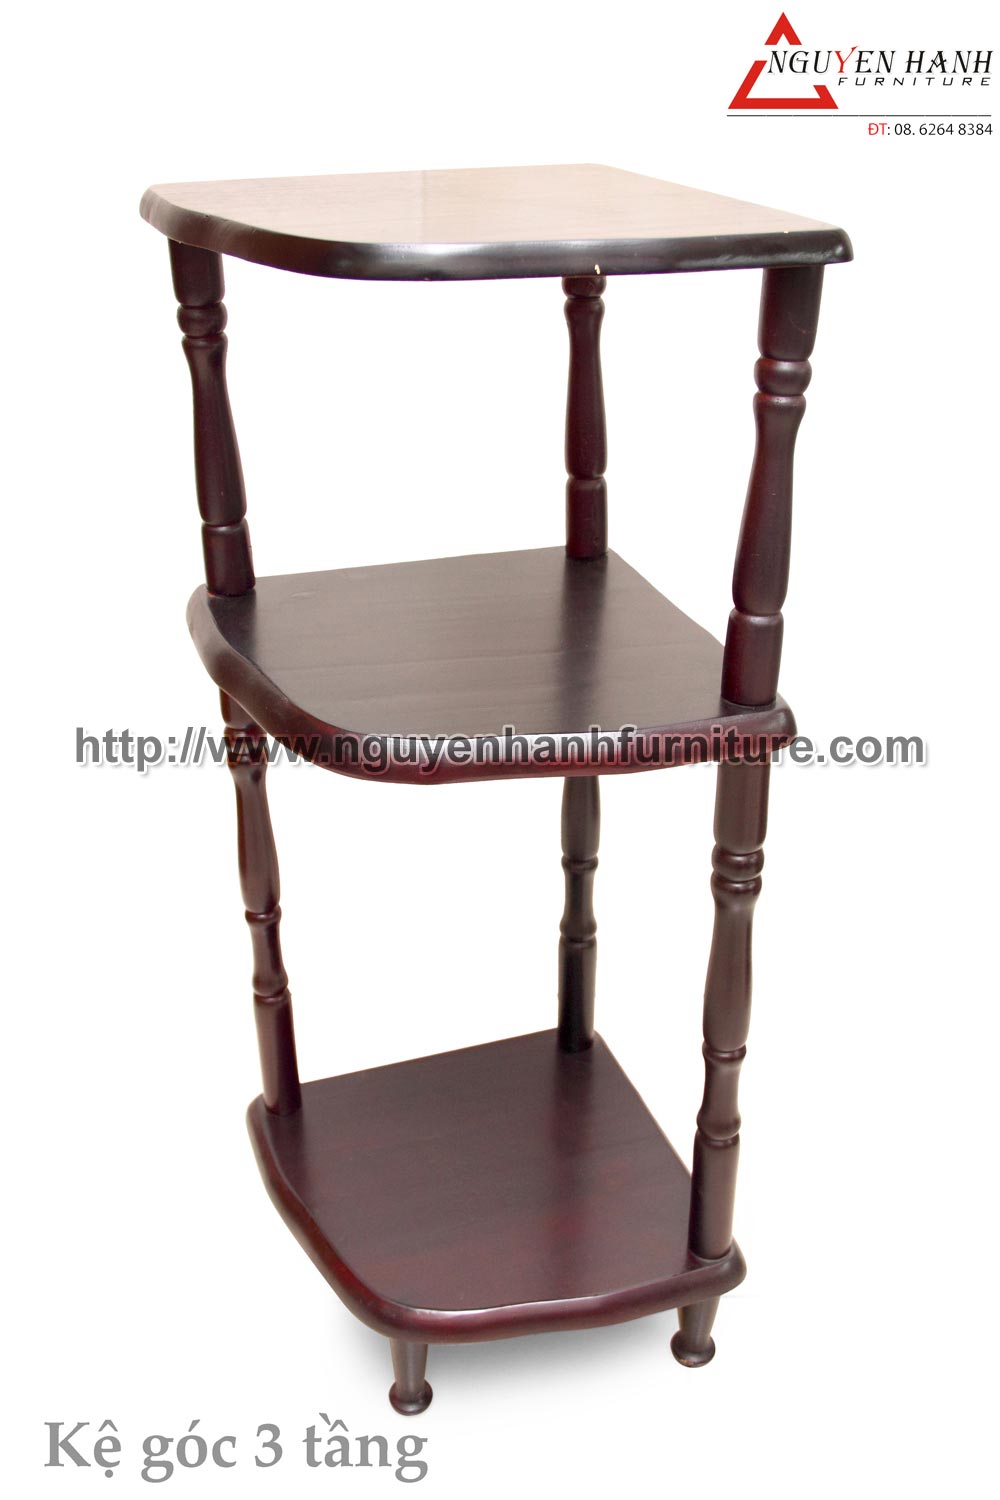 Name product: Tripple storey In